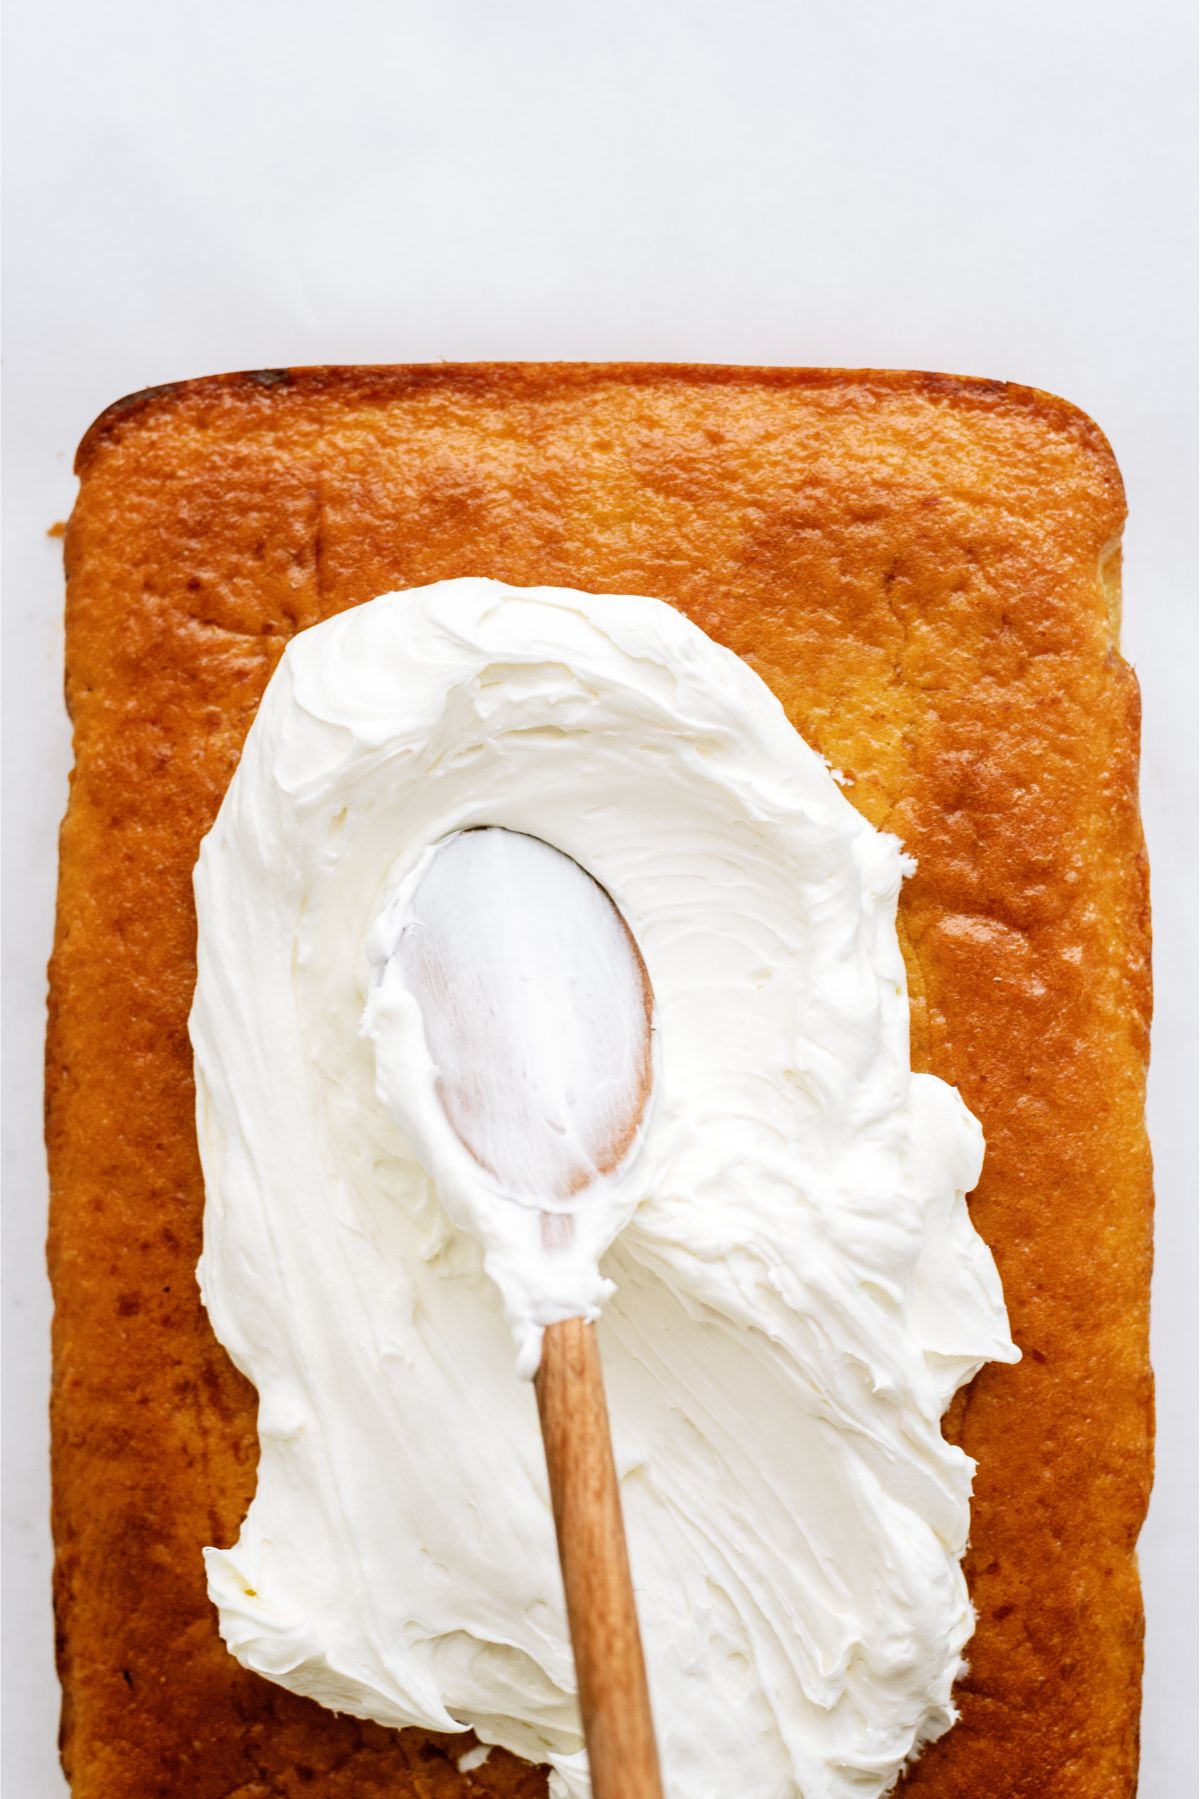 Spreading frosting on Pumpkin Layered Magic Cake with a wooden spoon